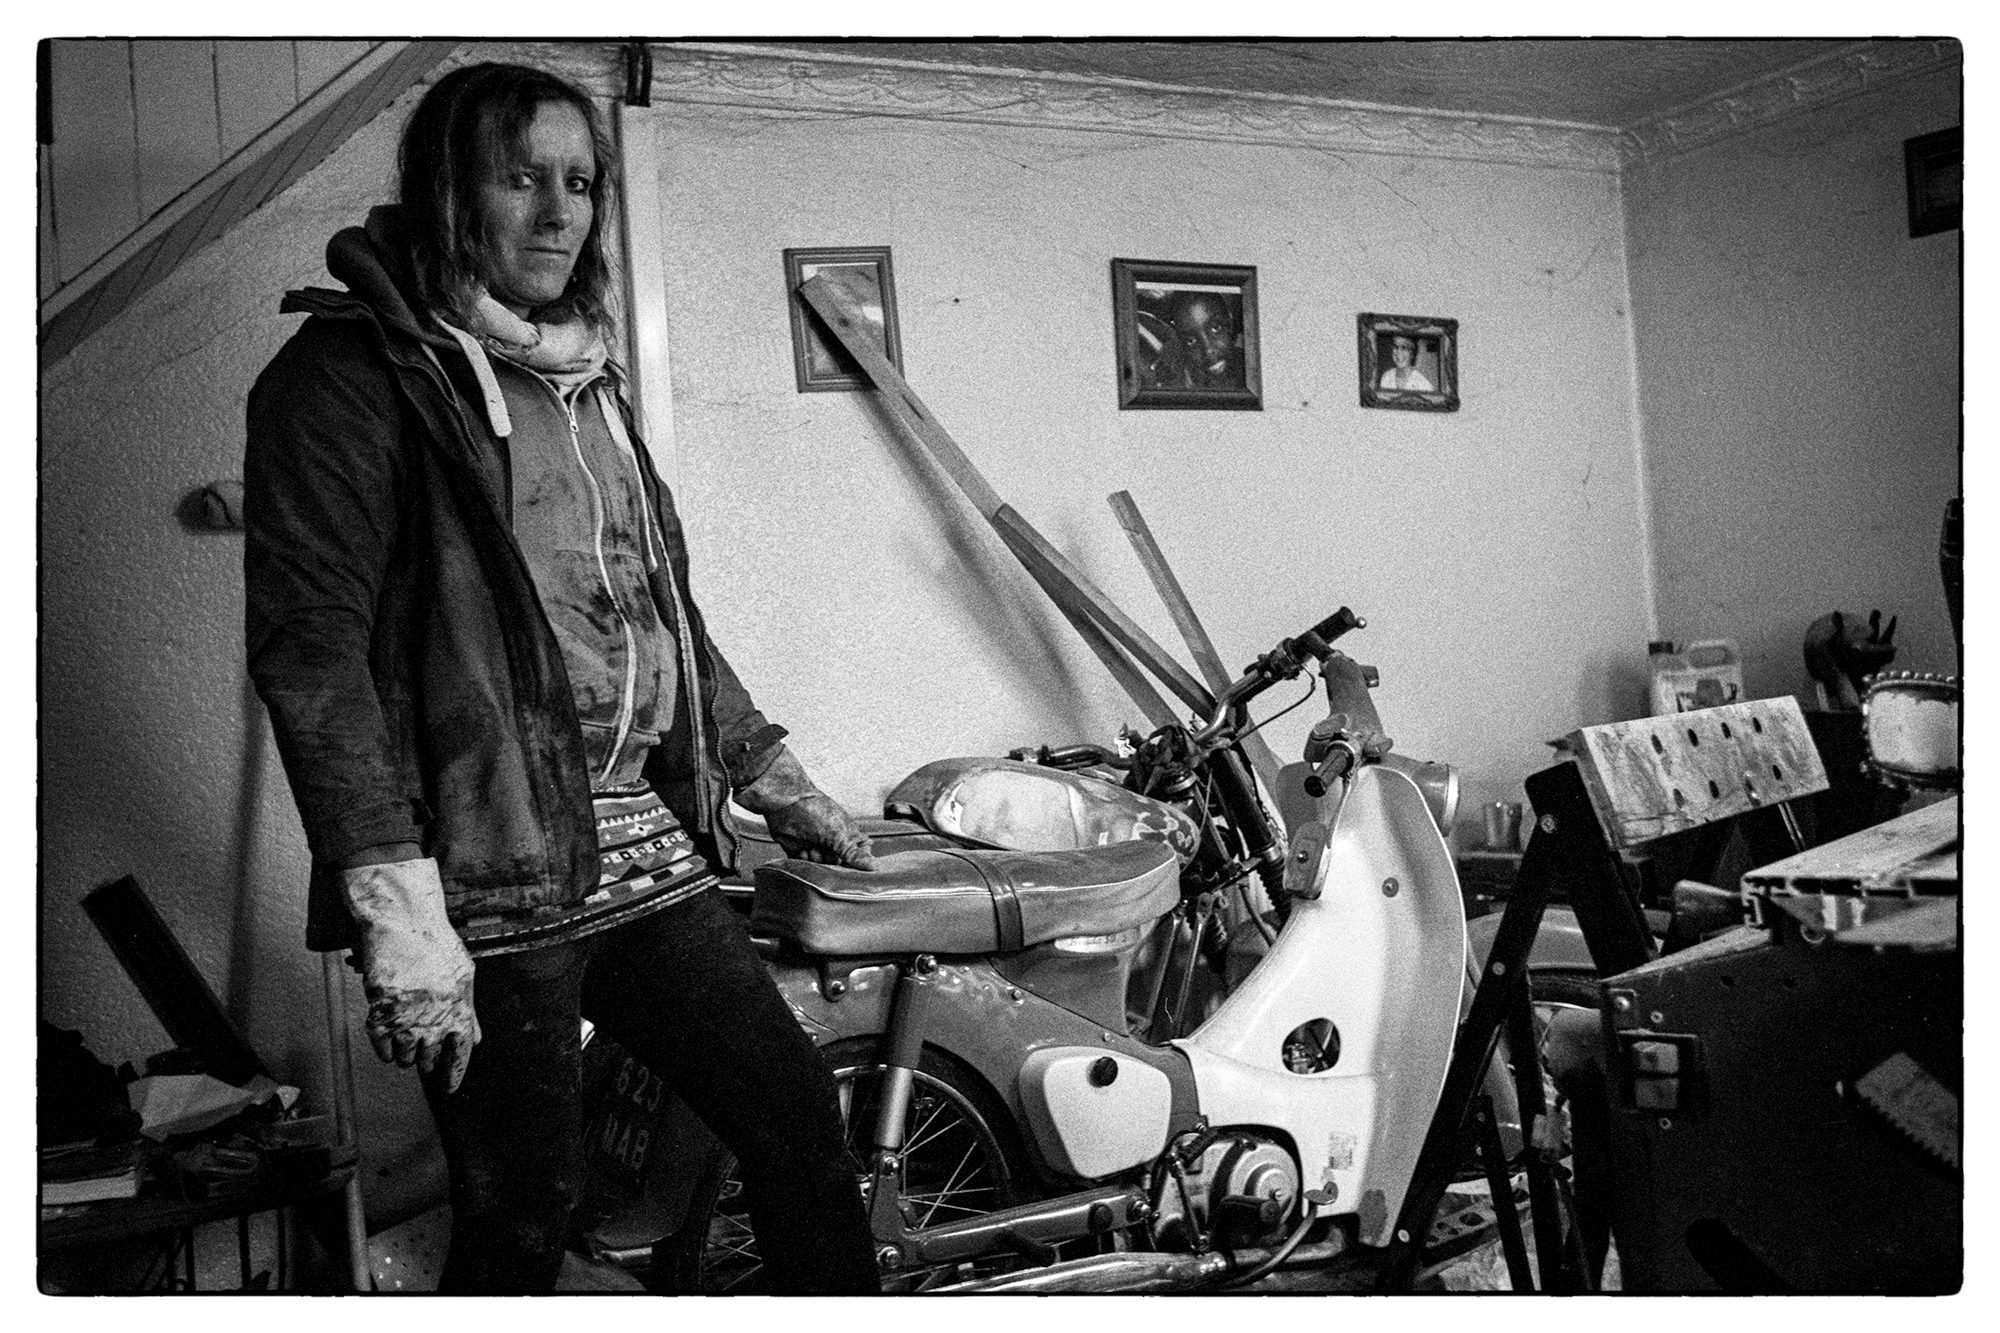 Black and white photograph of a transgender woman stood next to a motorbike indoors